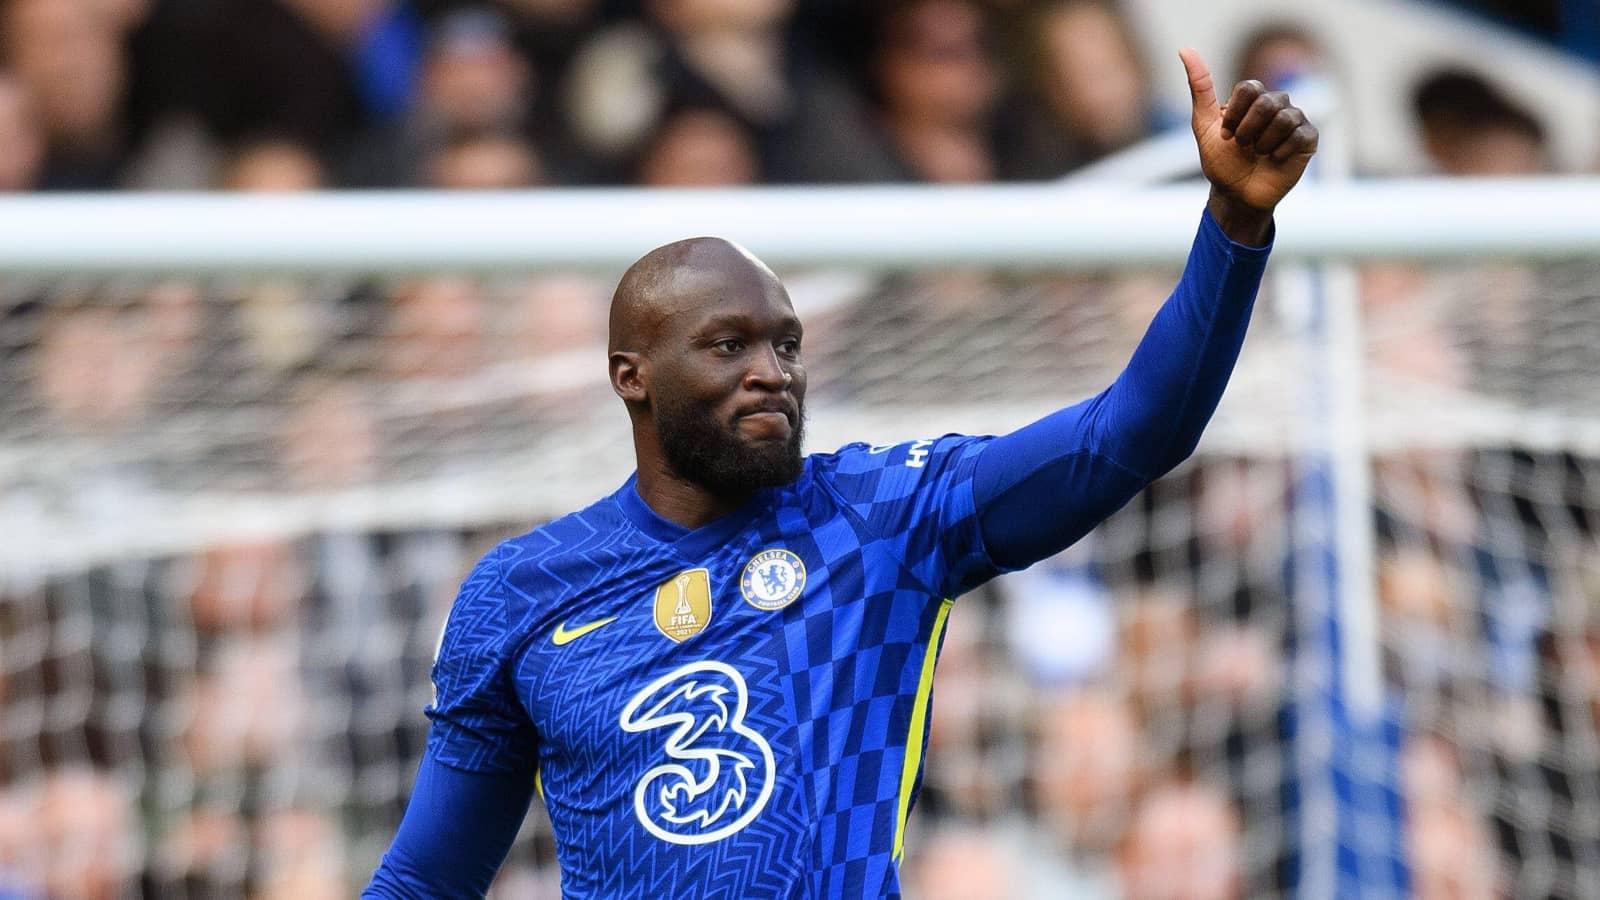 belgian striker romelu lukaku gives thumbs up while playing for chelsea in premier league match